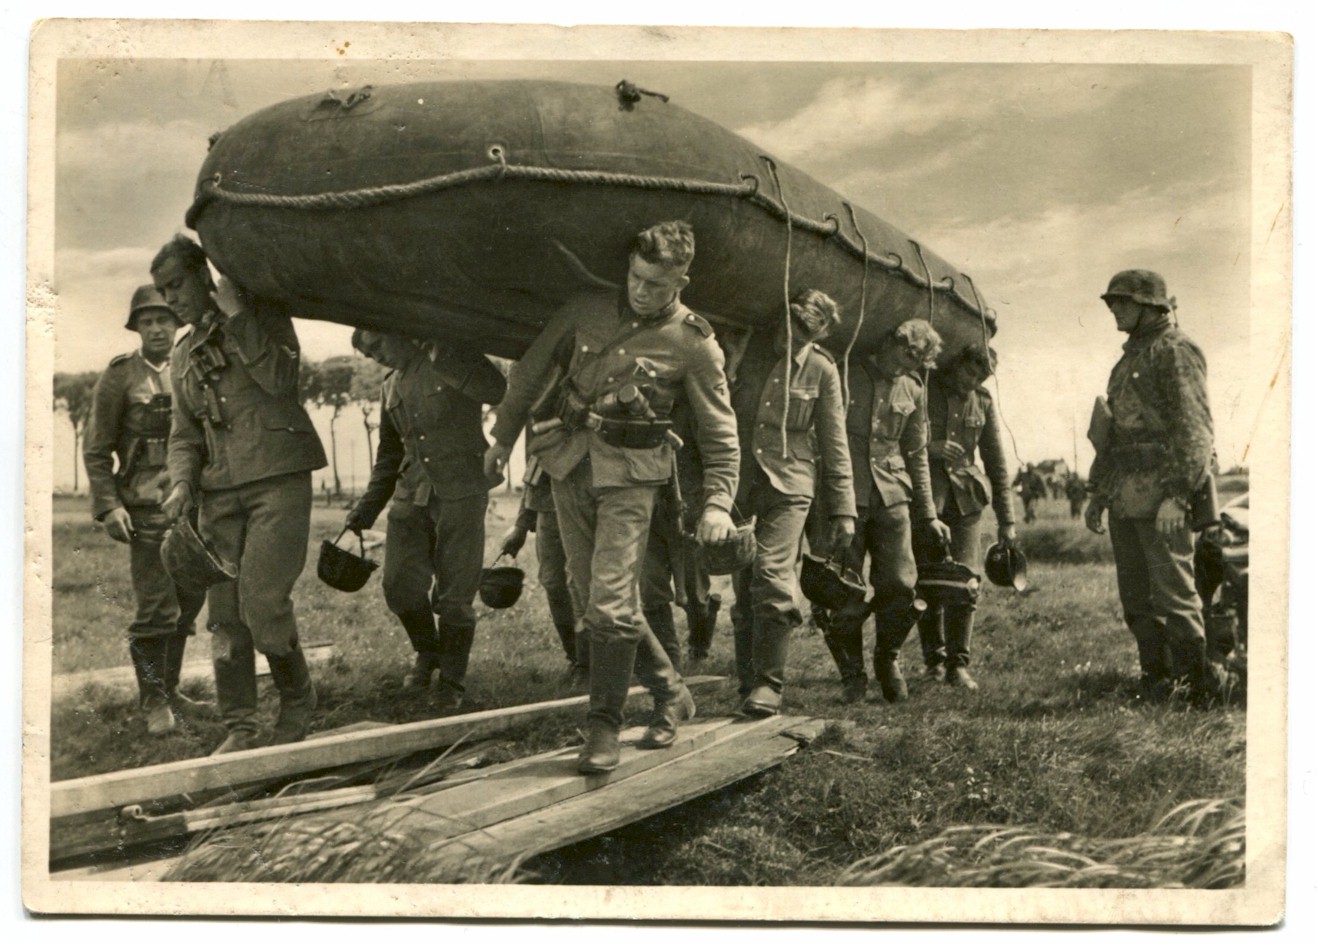 UNSERE WAFFEN SS POST CARD "WITH THE RUBBER BOAT TO THE RIVER"